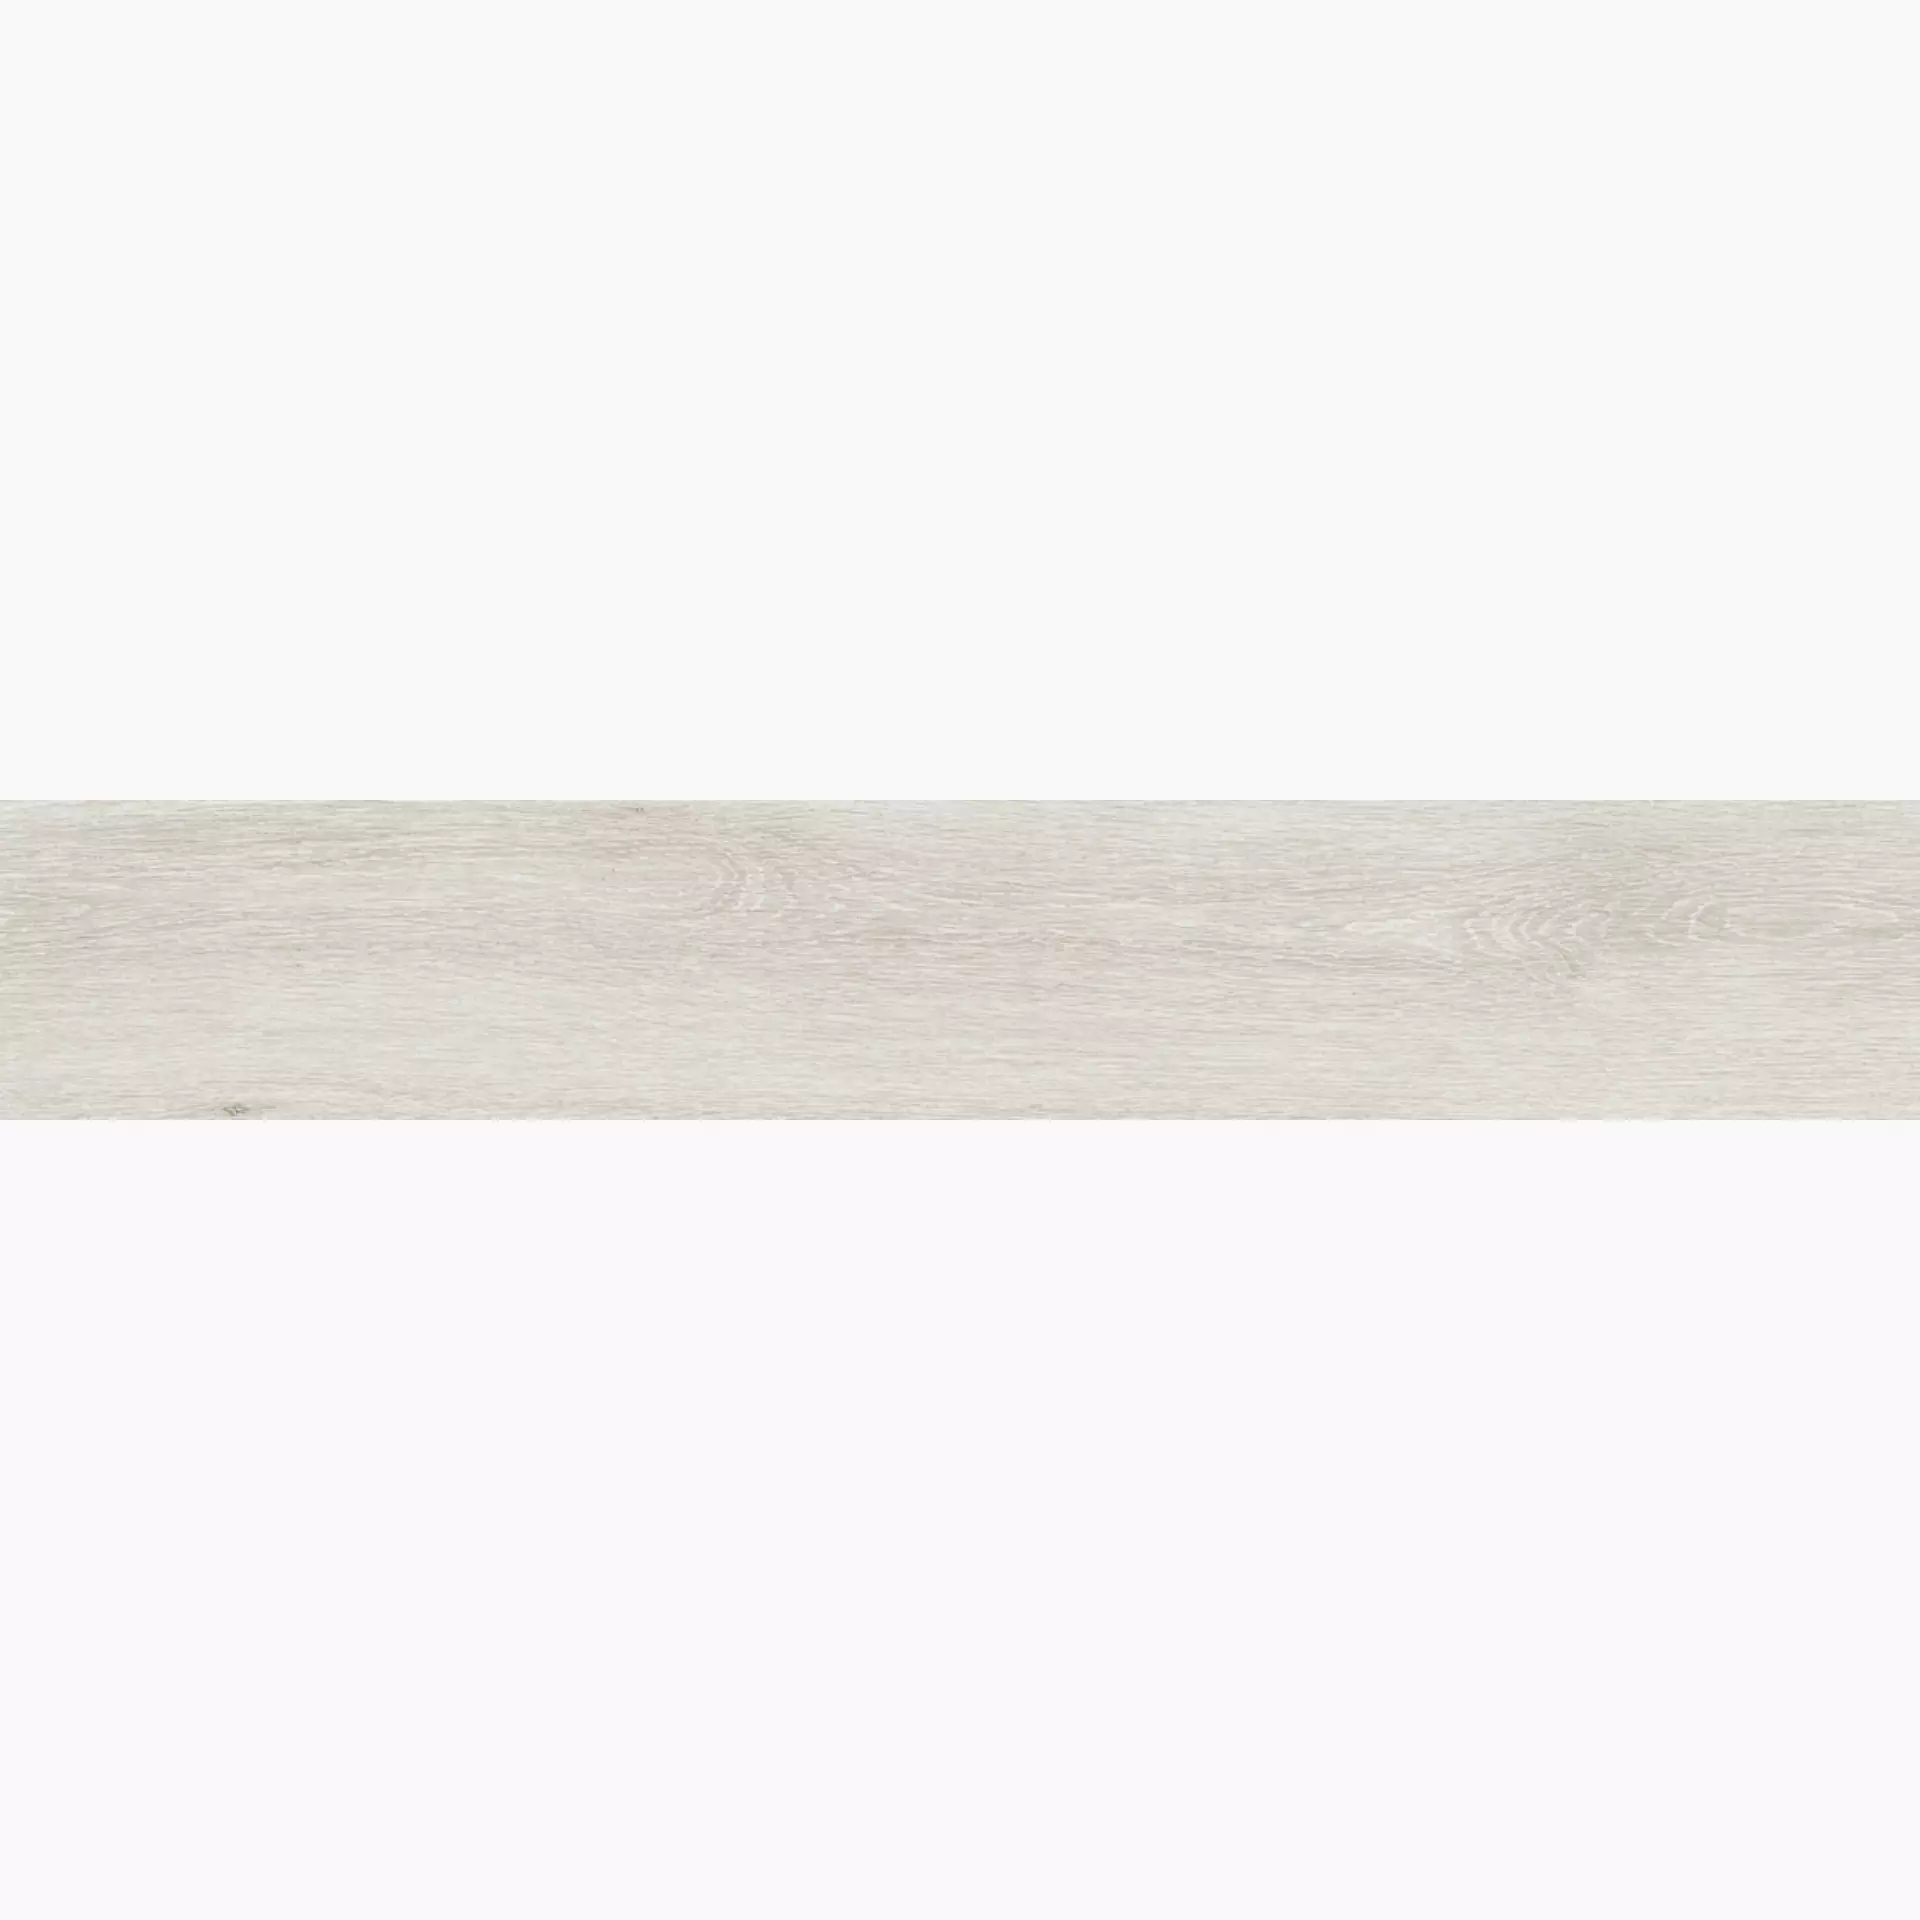 Ergon Tr3Nd White Naturale E414 20x120cm rectified 9,5mm